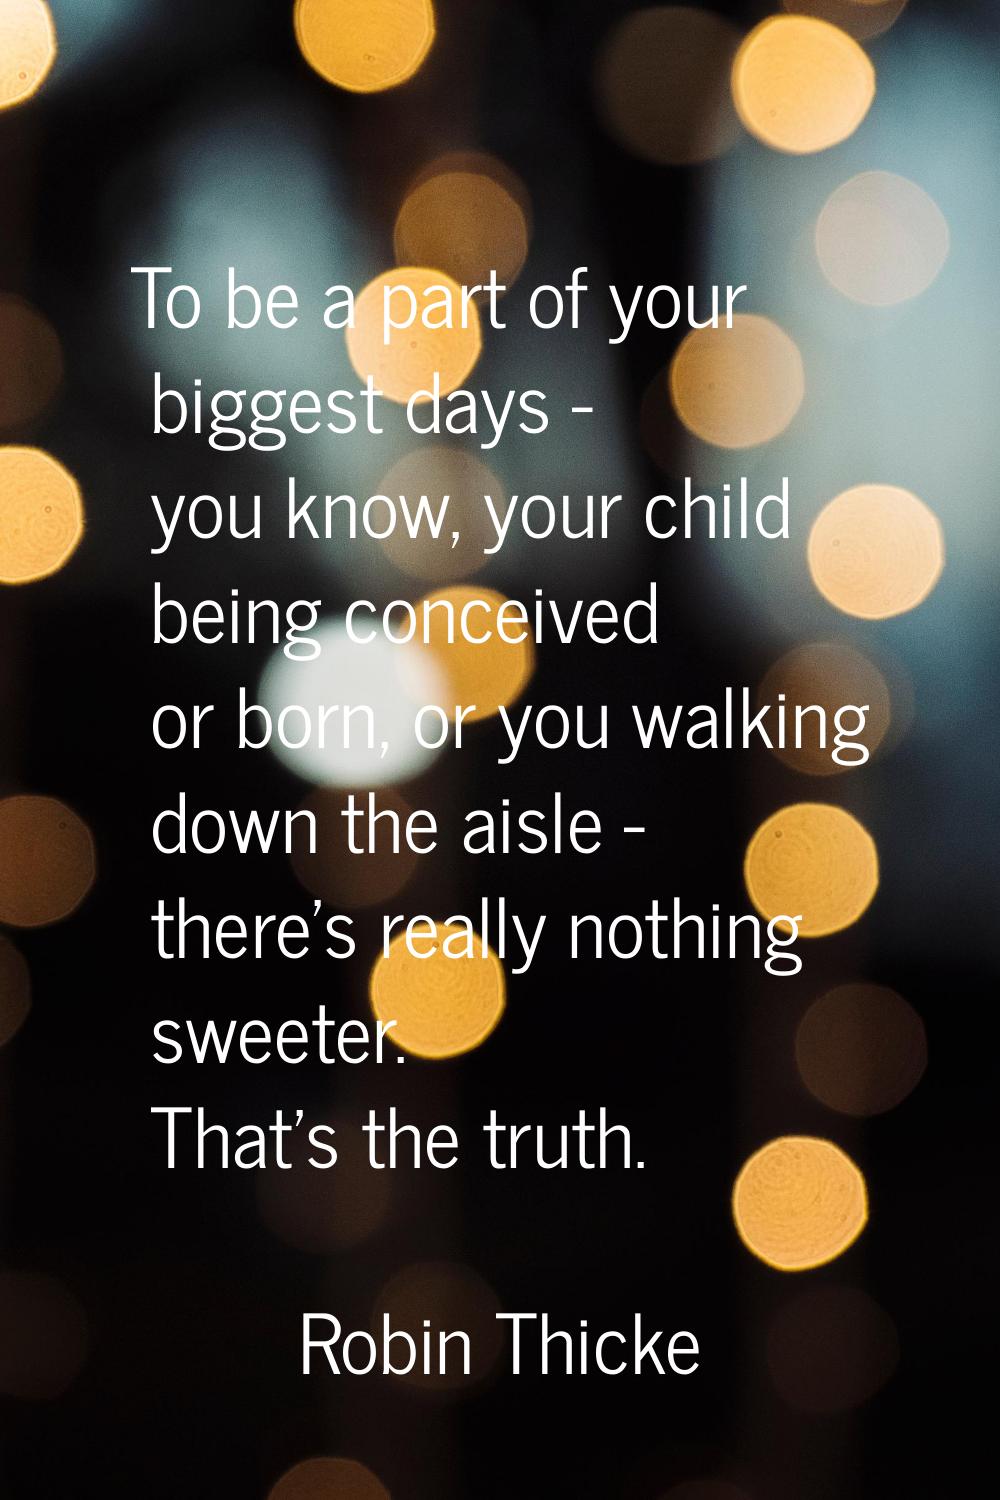 To be a part of your biggest days - you know, your child being conceived or born, or you walking do